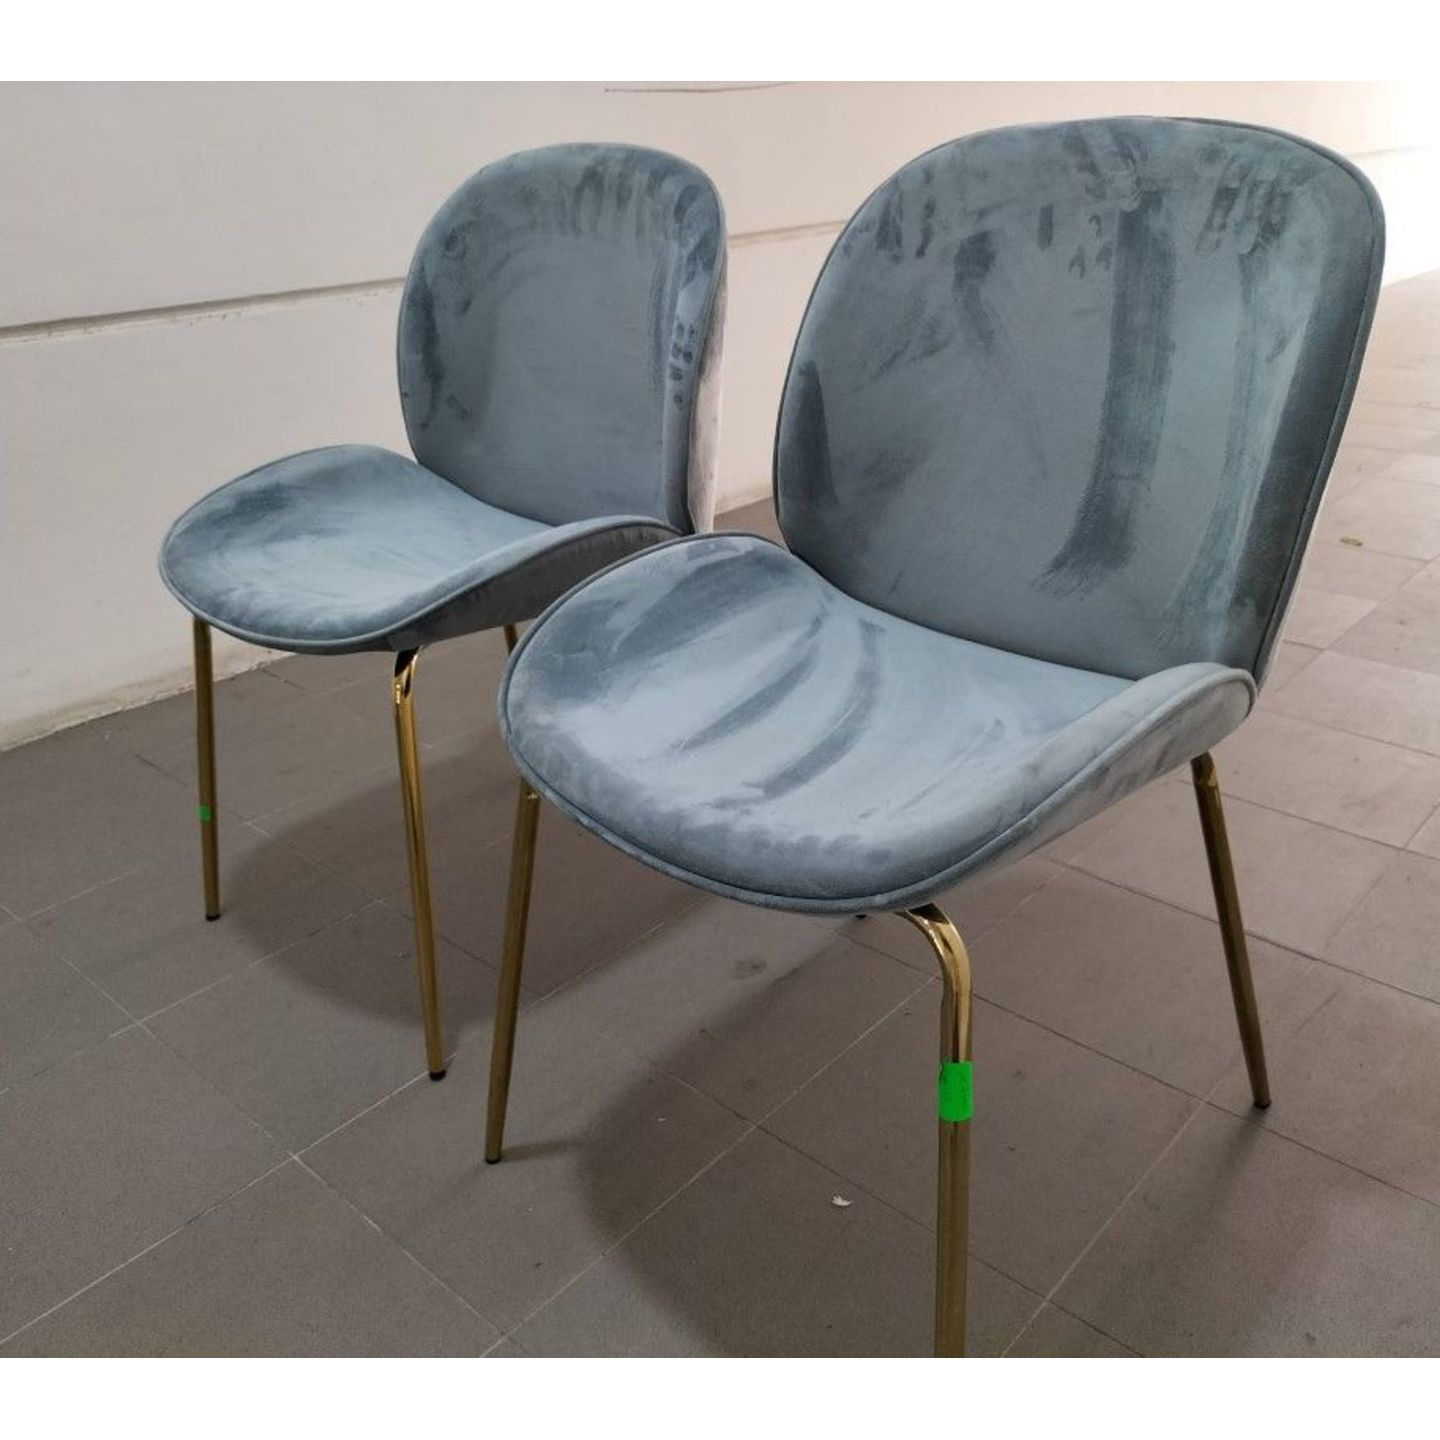 2 x VOLKZ Chairs in VELVET PALE BLUE with Gold Frame